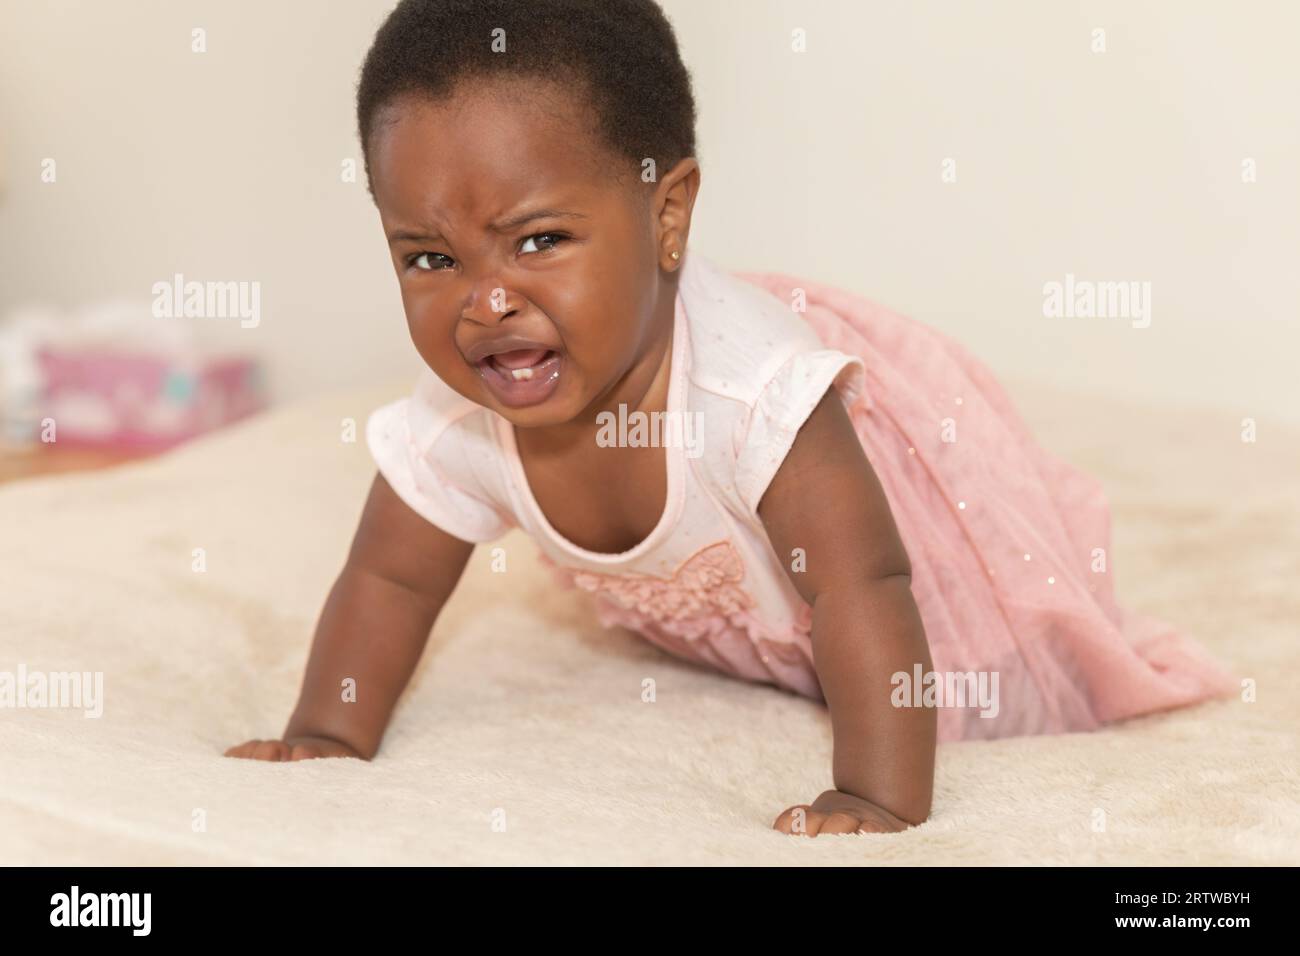 Portrait of a crying black baby girl dressed in a pink dress crawling on a bed Stock Photo